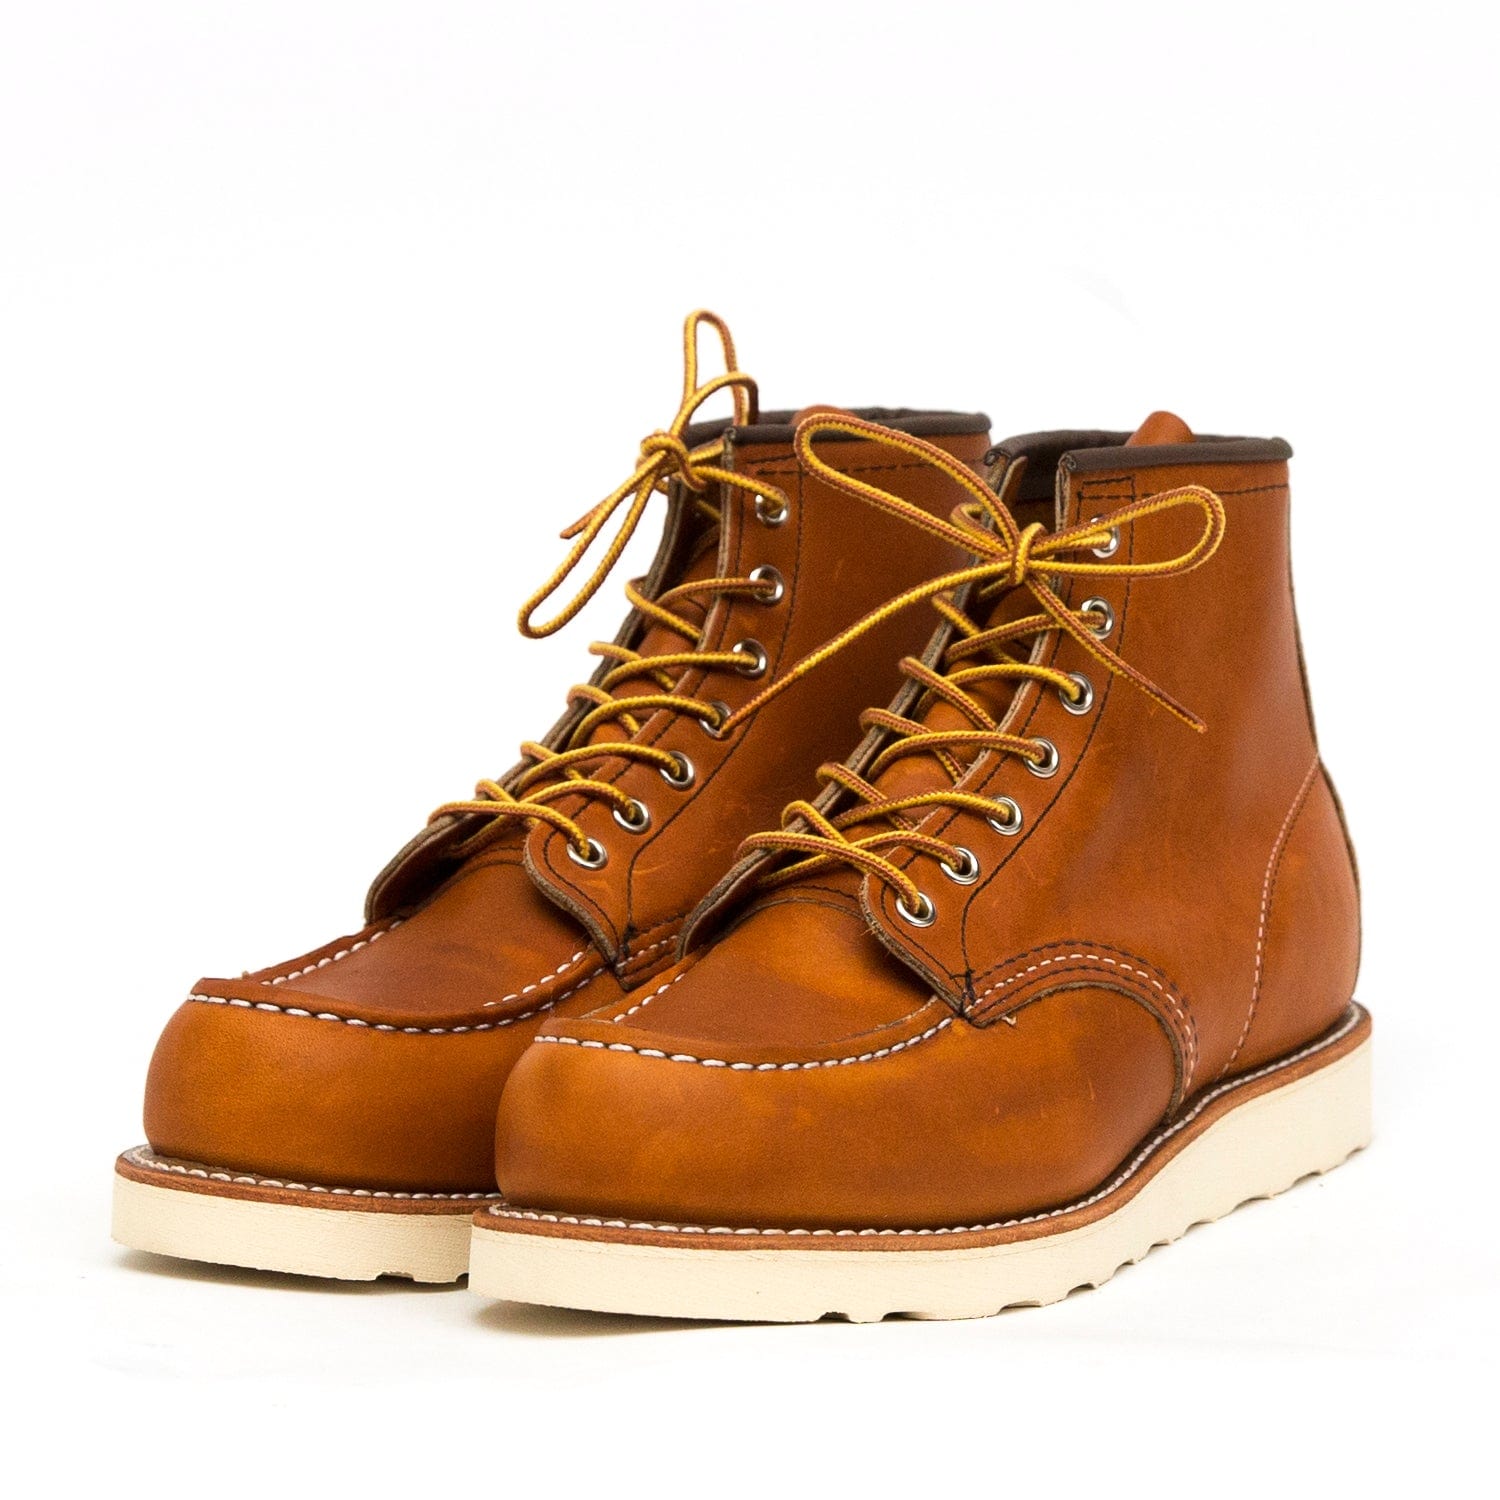 red wing moc toe laces